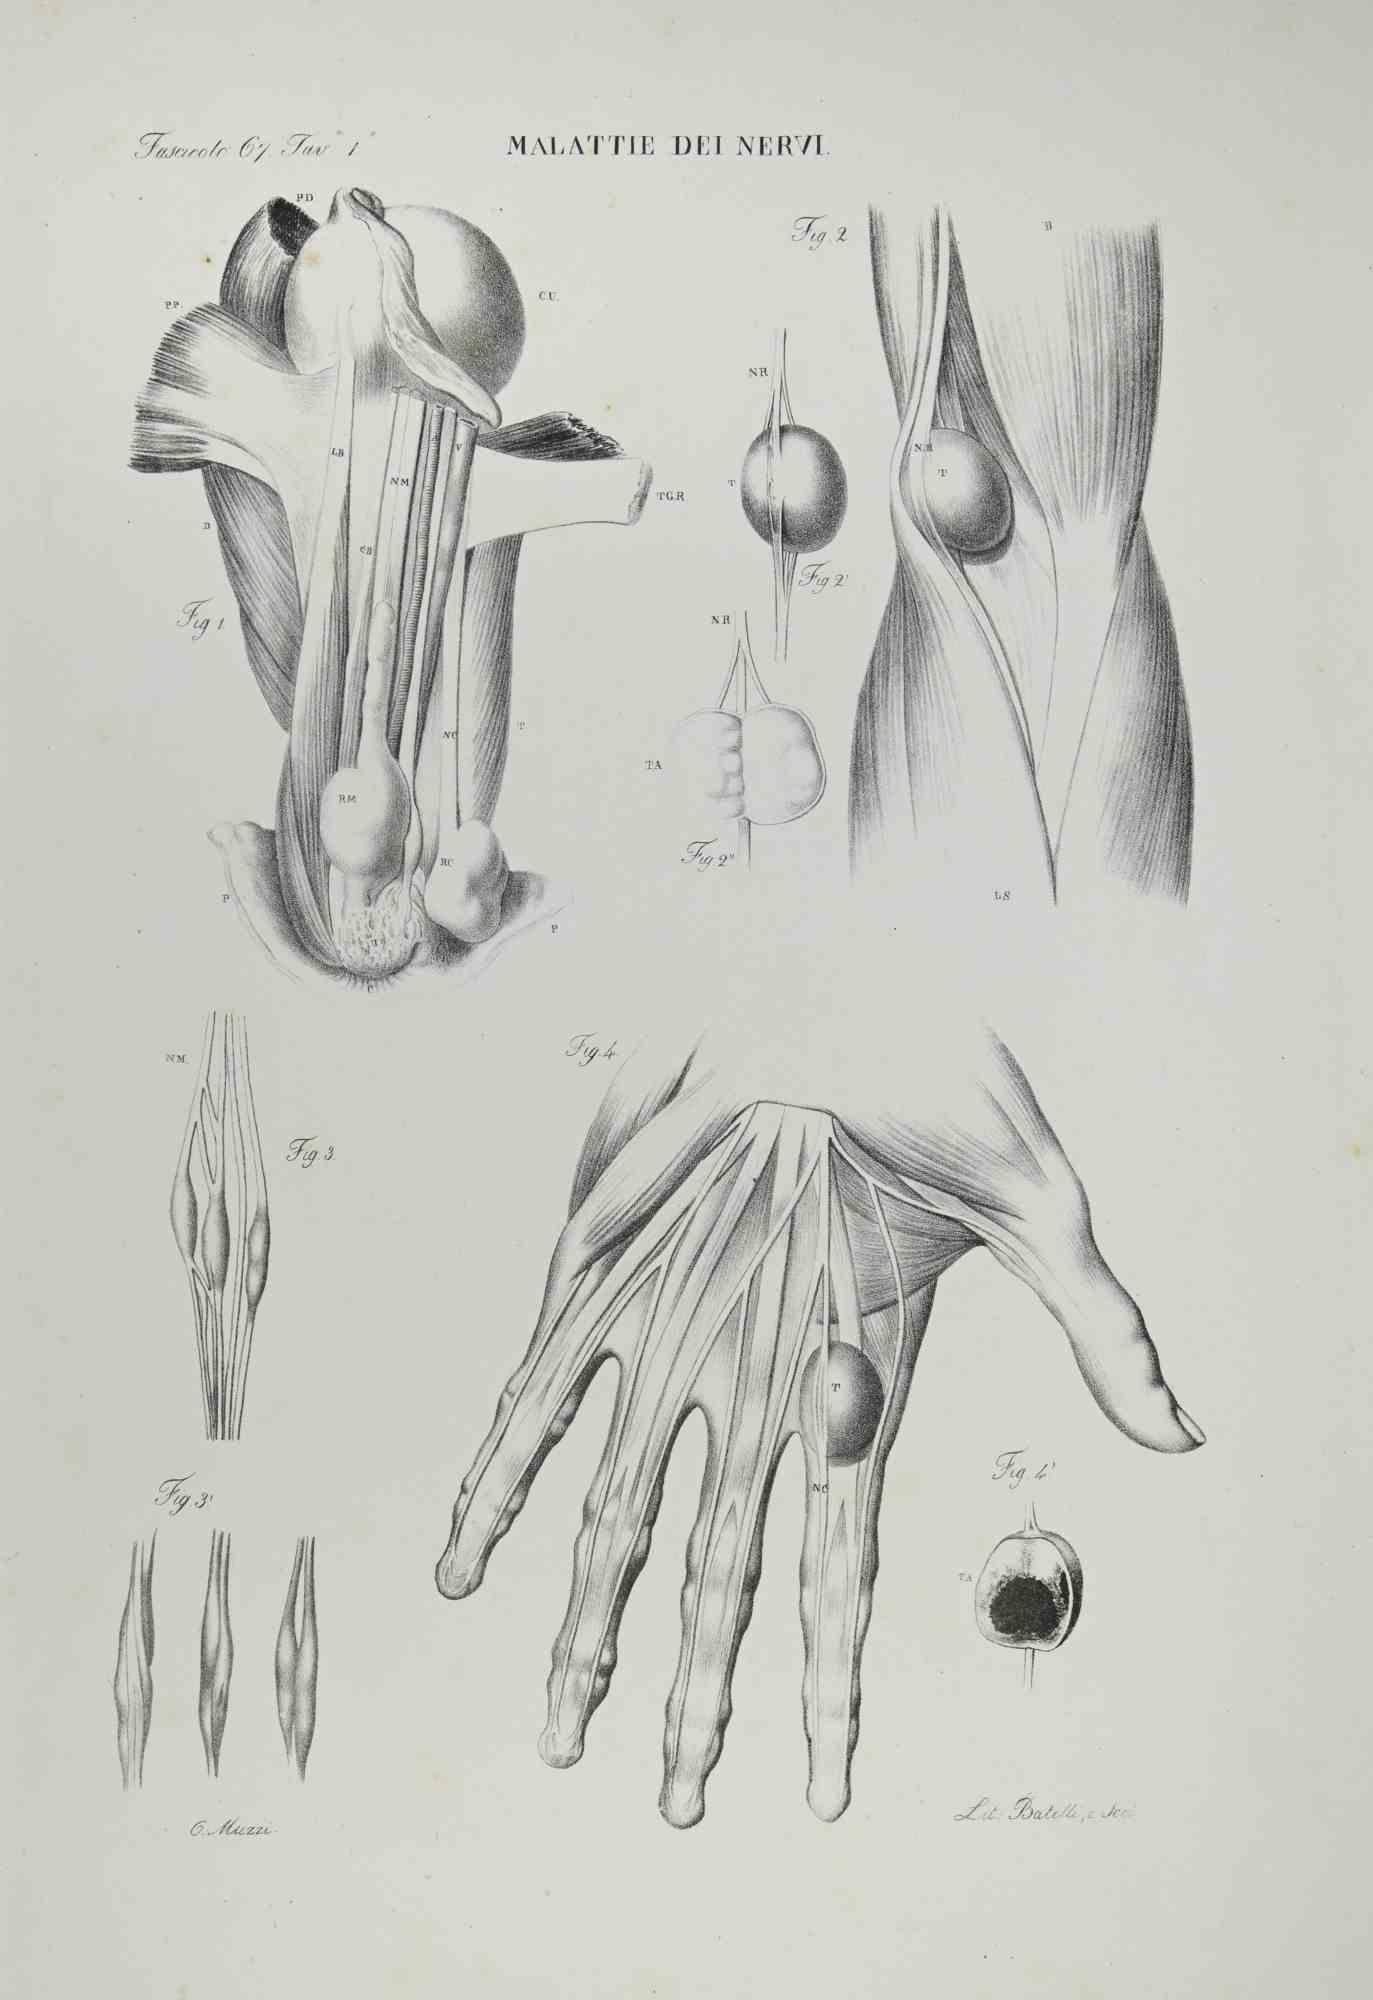 Nervous Diseases is a lithograph realized by Ottavio Muzzi for the edition of Antoine Chazal, Human Anatomy, Printers Batelli and Ridolfi, 1843.

The work belongs to the Atlante generale della anatomia patologica del corpo umano by Jean CRUVEILHIER,